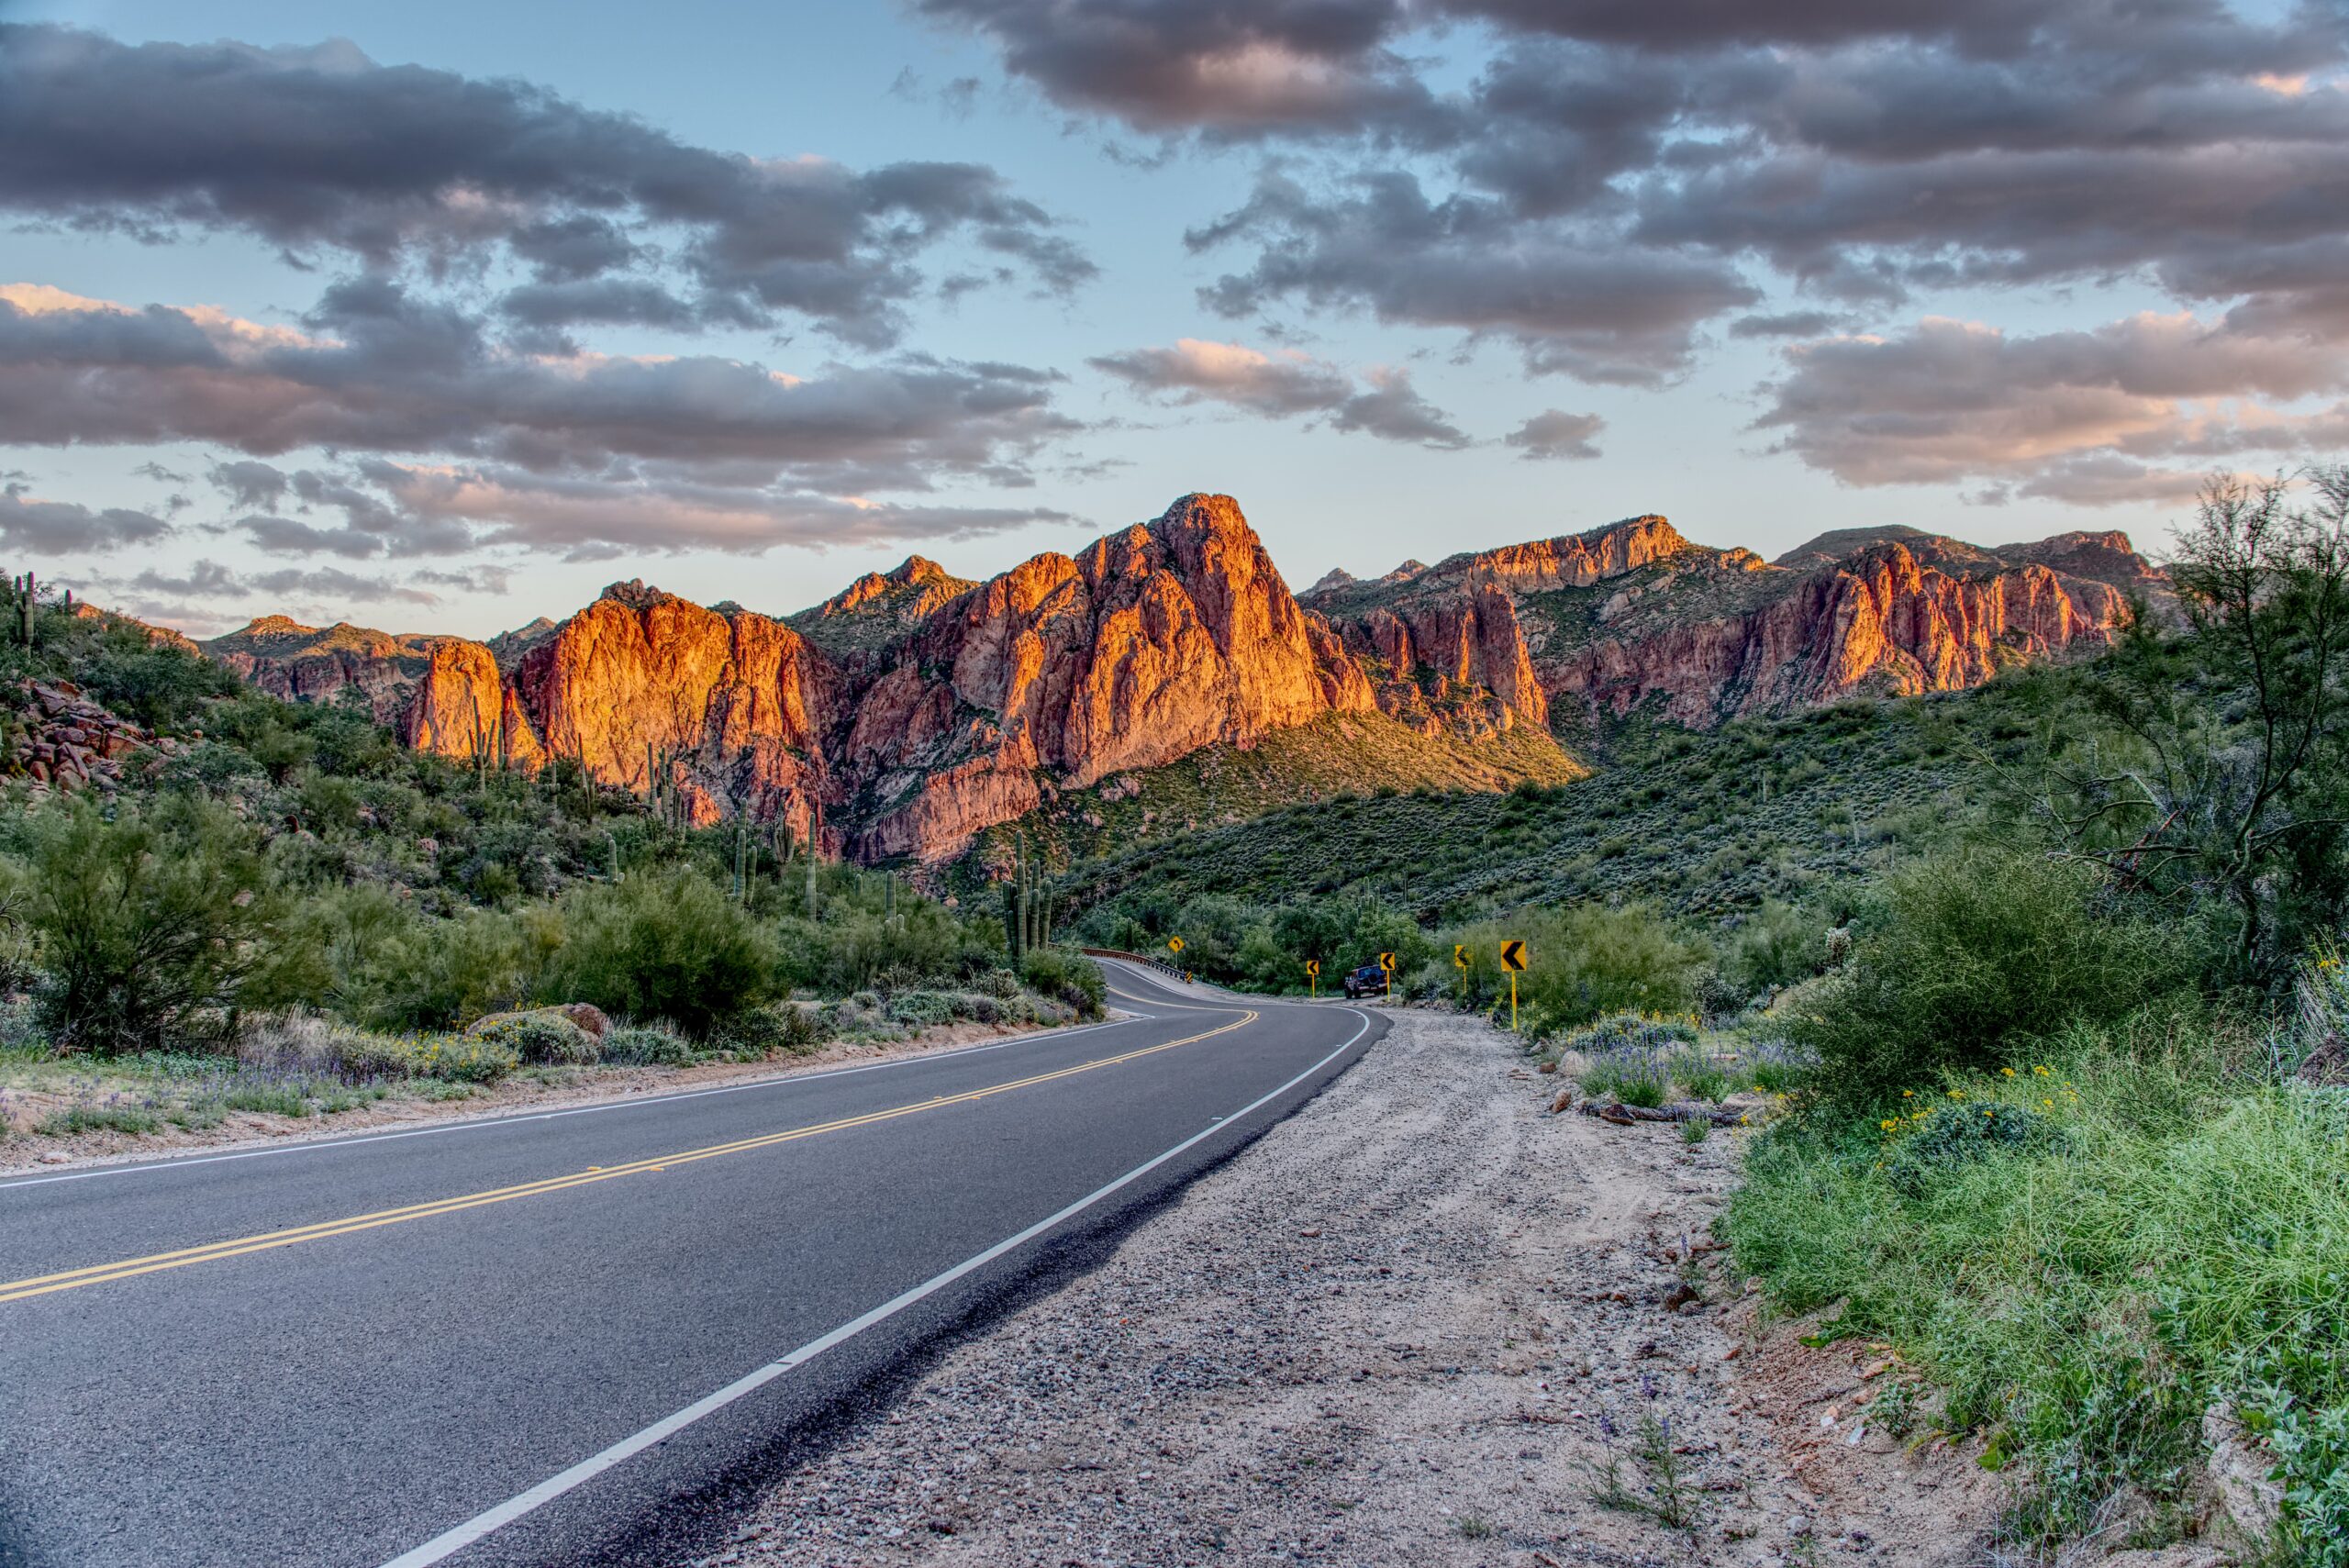 Mesa is the third largest city in Arizona and one of the best places to live for desert landscapes and outdoor activities. Pictured: Mountain views in Mesa, Arizona.